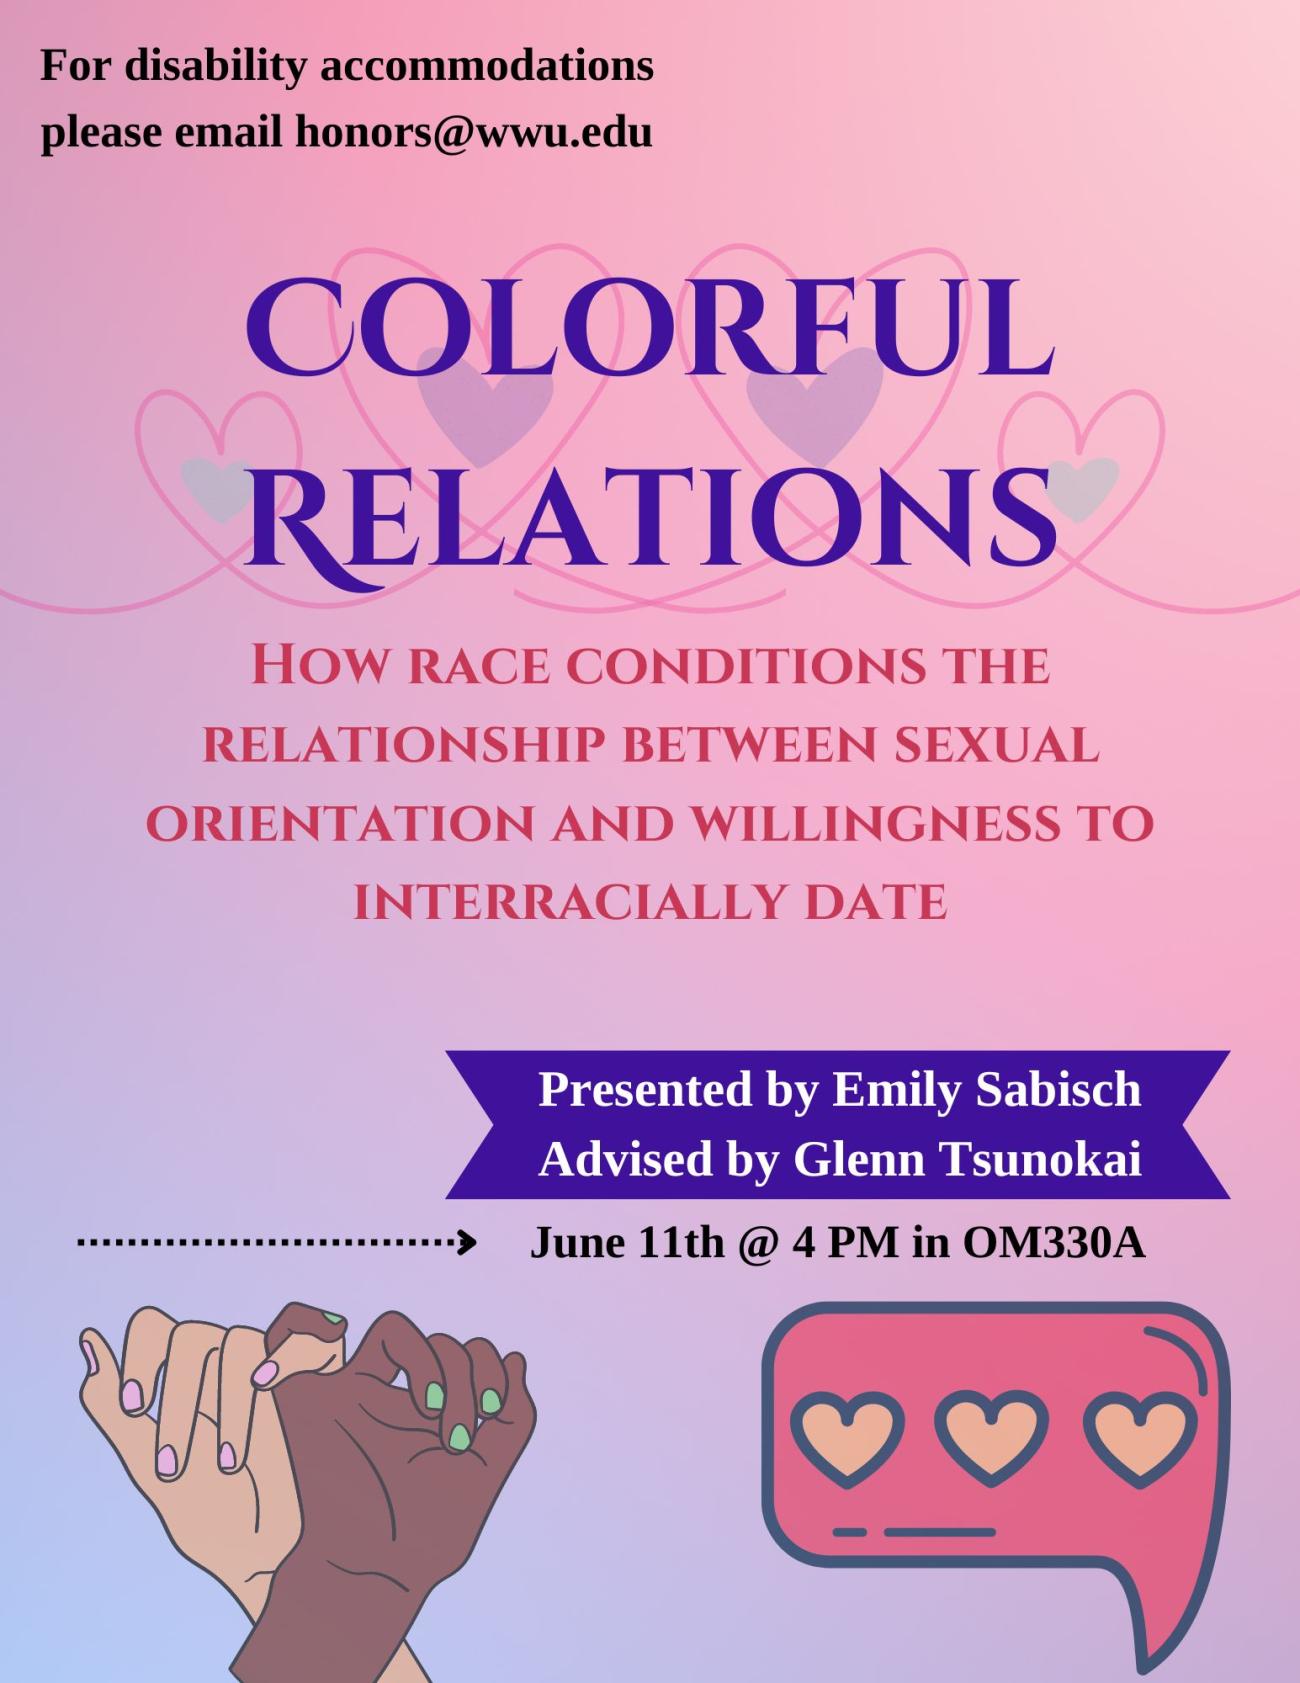 Purple and pink ombre background containing an image of a white hand and a person of color hand linking pinkies, a pink text emoticon with hearts, and a string of hearts.  Text reads “Colorful Relations: How Race Conditions the Relationship between Sexual Orientation and Willingness to Interracially Date.  Presented by Emily Sabisch.  Advised by Glenn Tsunokai.  June 11th at 4 PM in OM330A.  For disability accommodations please email honors@wwu.edu”.